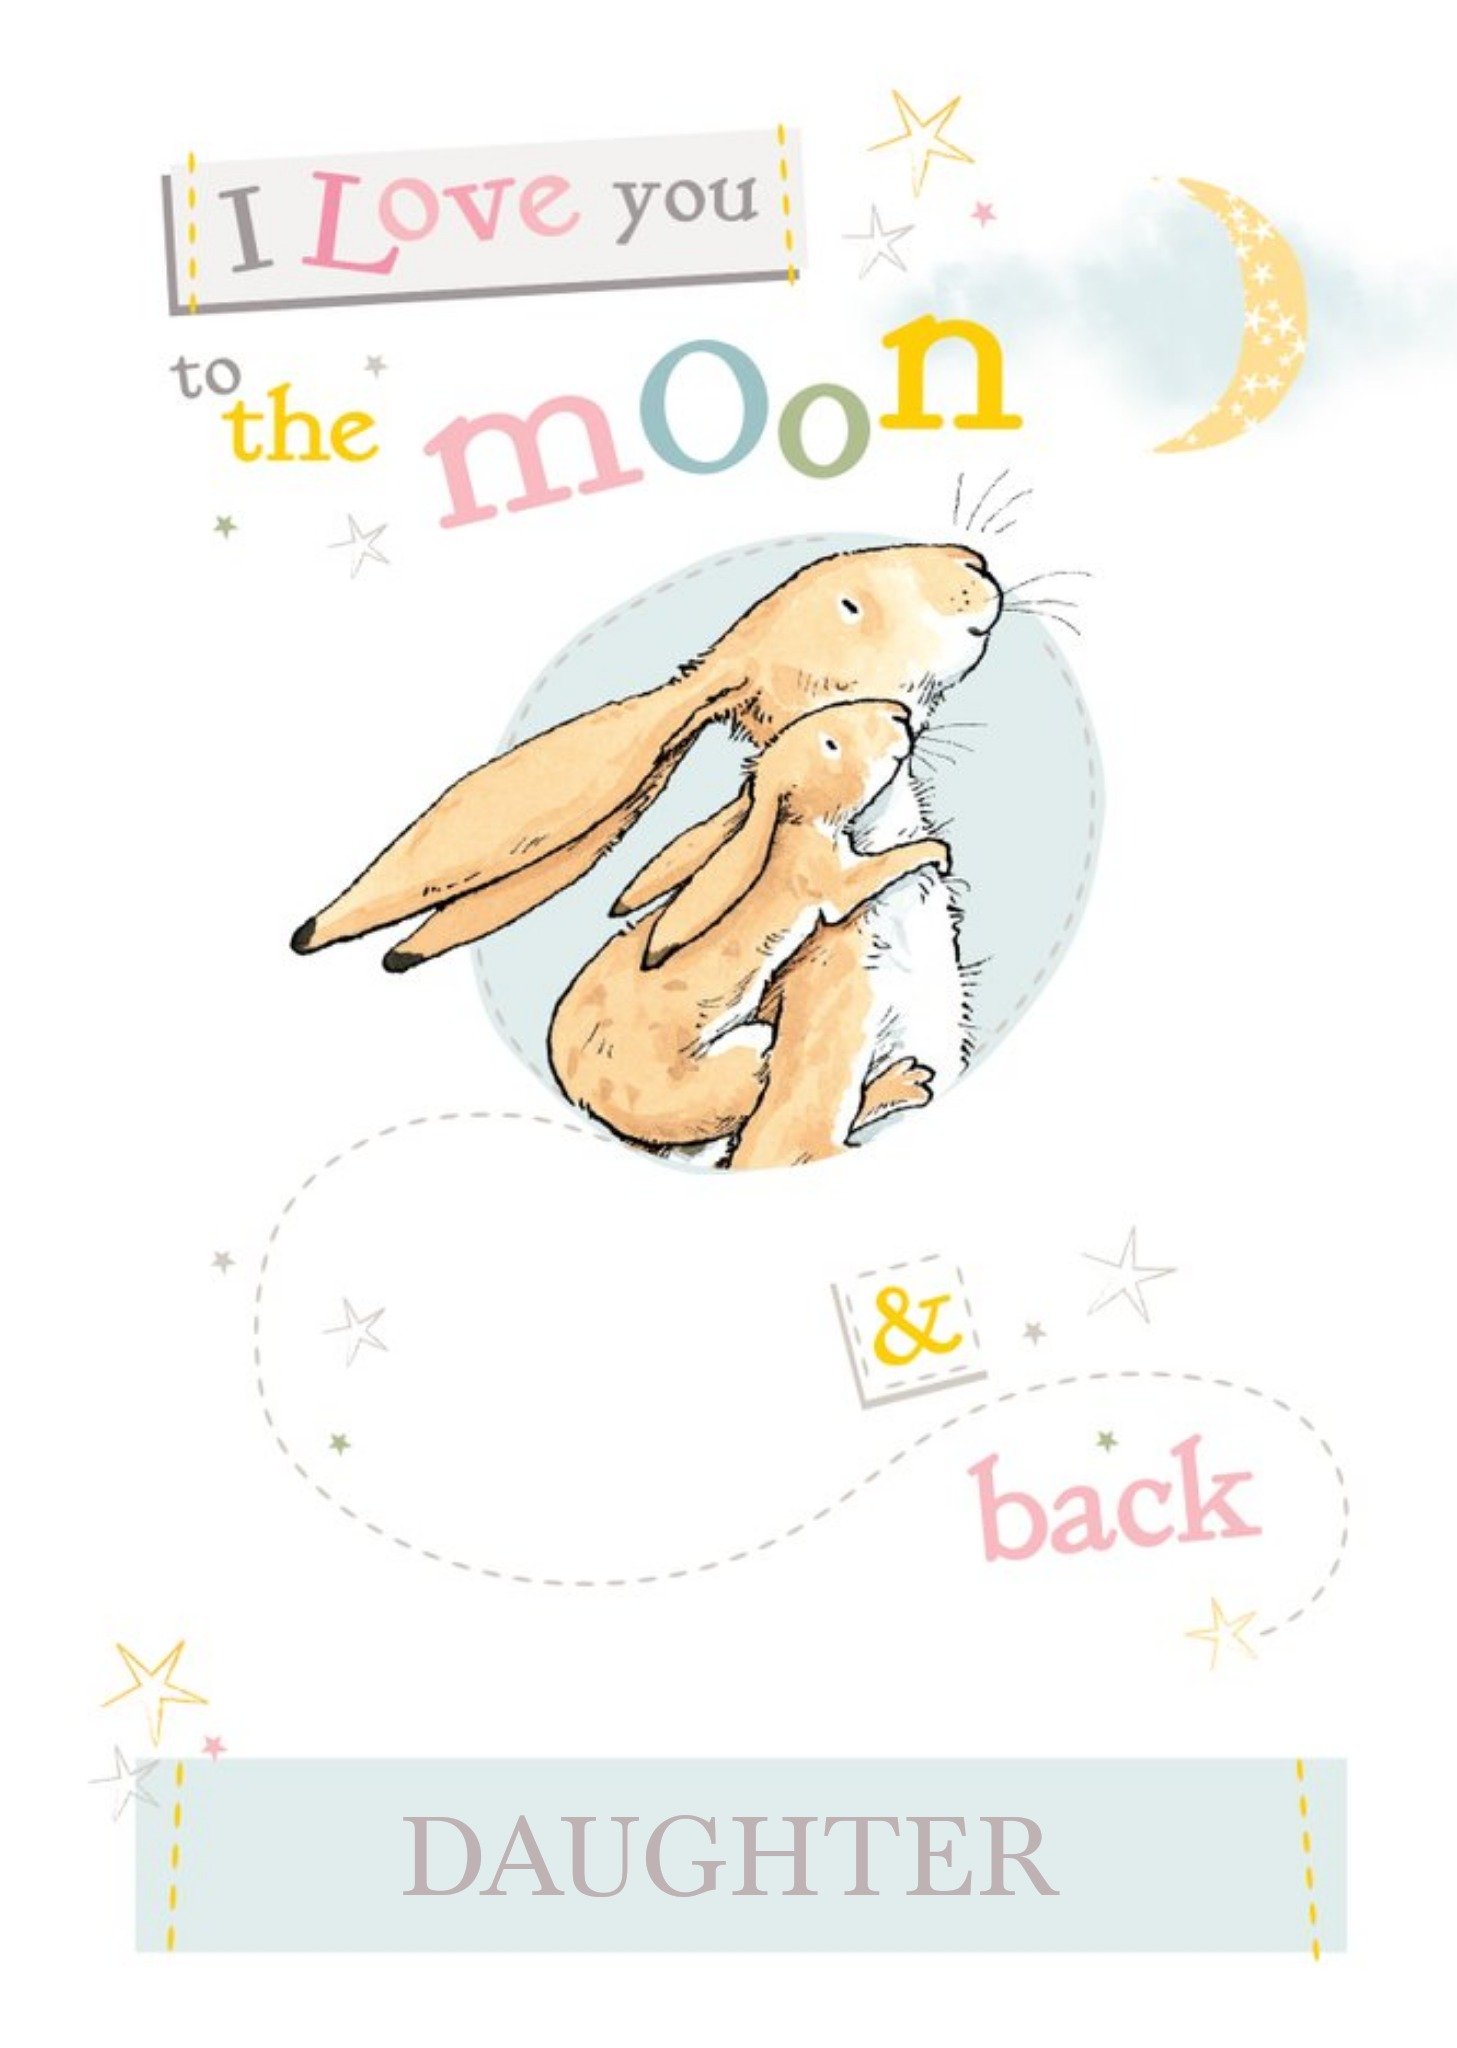 Guess How Much I Love You Danilo Ghmily Love You To The Moon And Back Daughter Card, Large